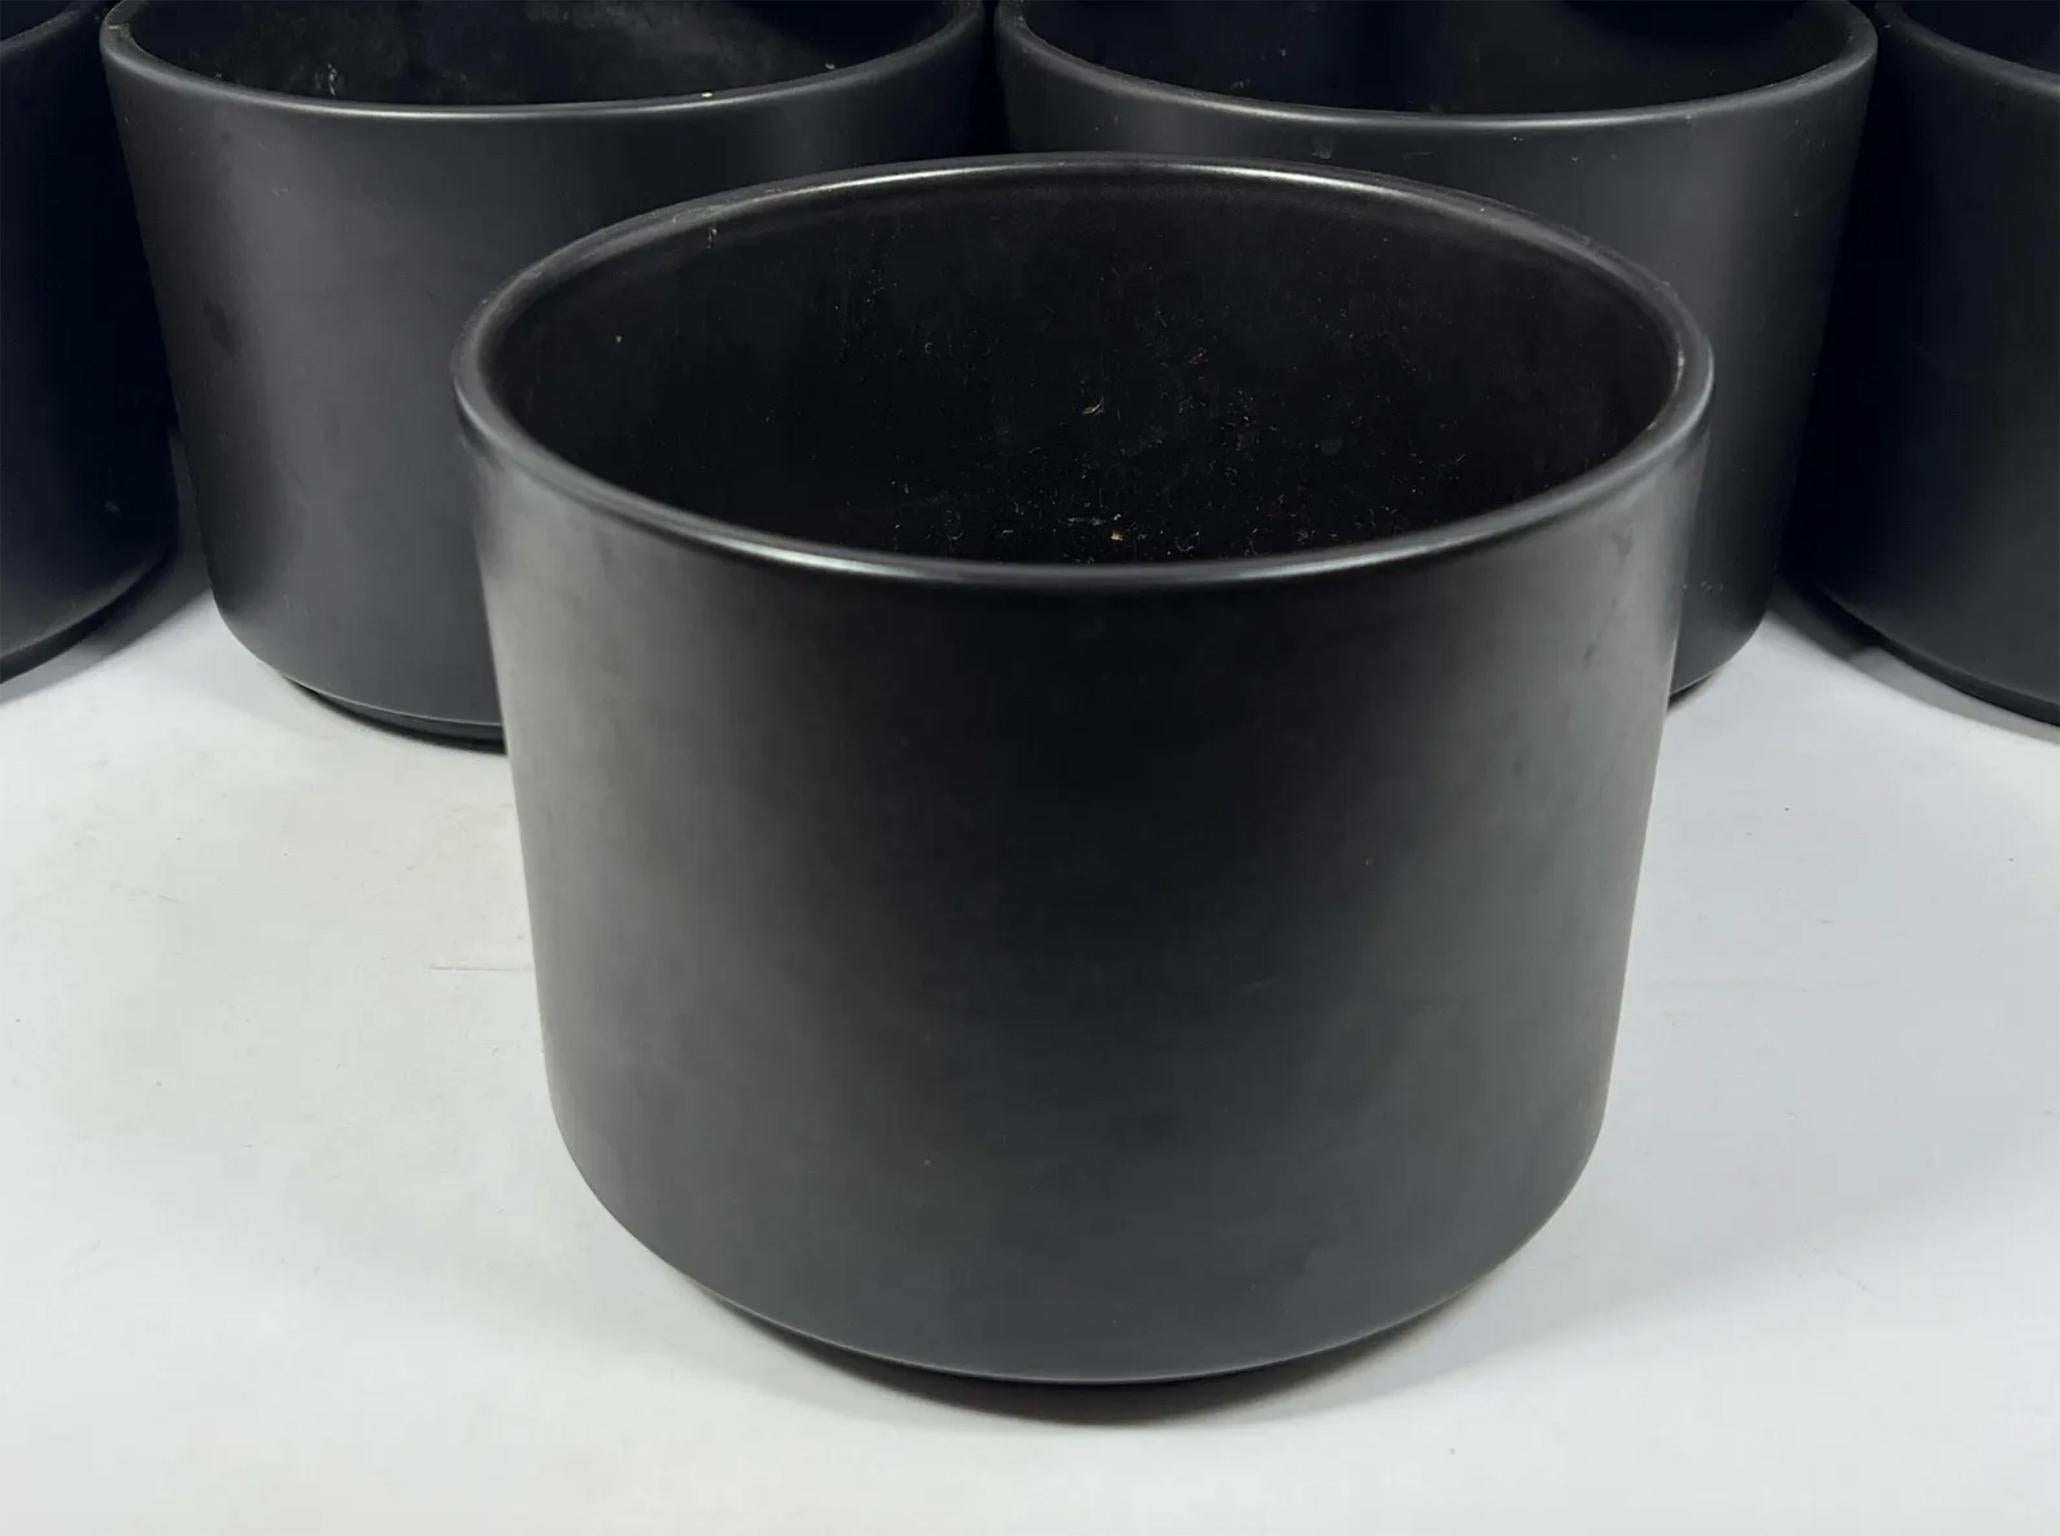 Mid-Century Modern Gainey Architectural Pottery Planters Pots dark Satin Black Glaze Ceramic Pottery circa 1960. Most are Labeled on bottom. Made in USA California. Located in NYC. 

(14) Available (Price is per Item)

Dimensions: 6